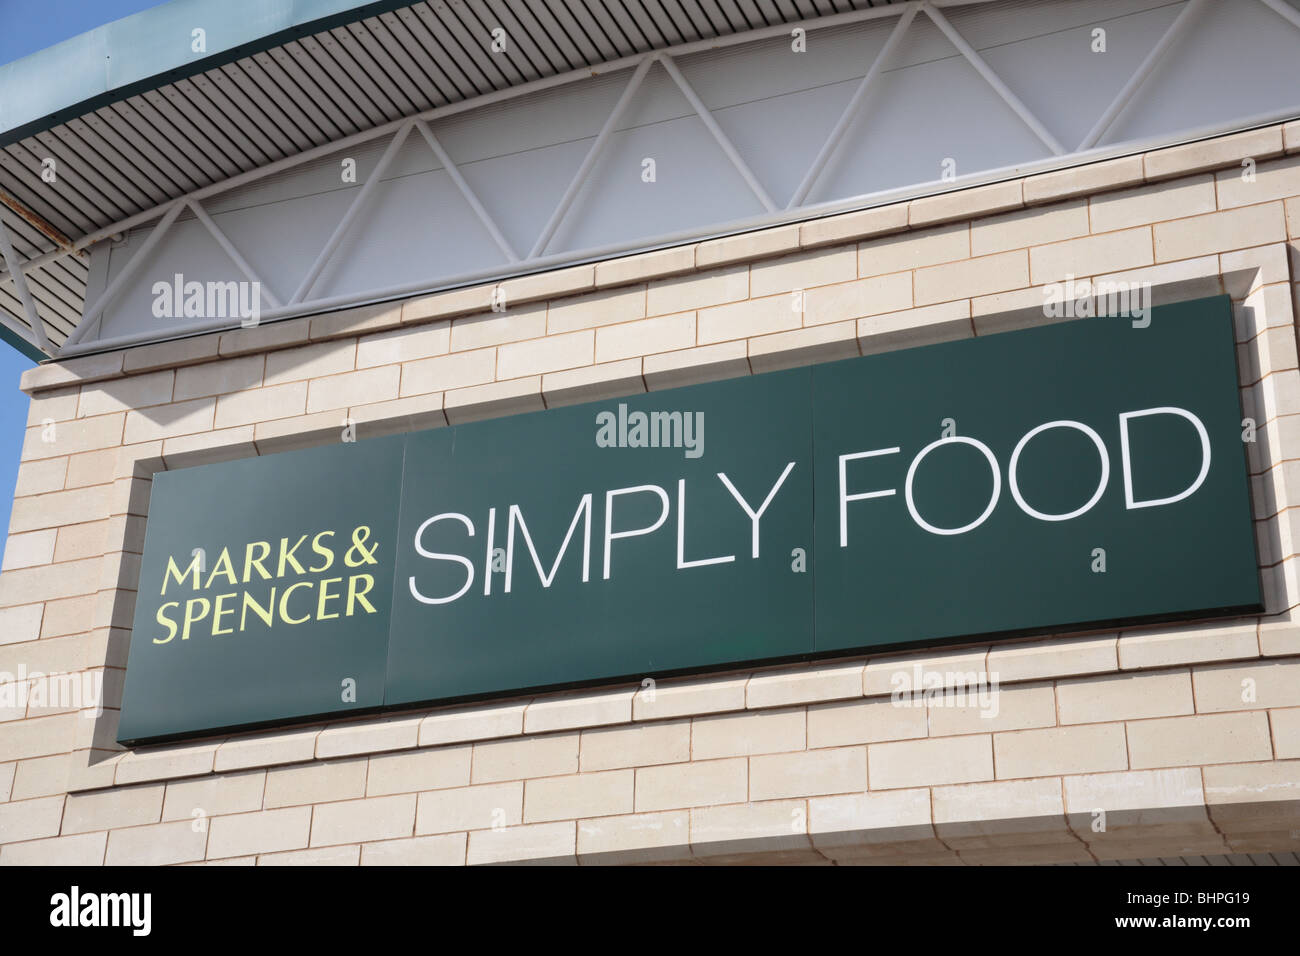 M&s Food Logo High Resolution Stock Photography and Images - Alamy